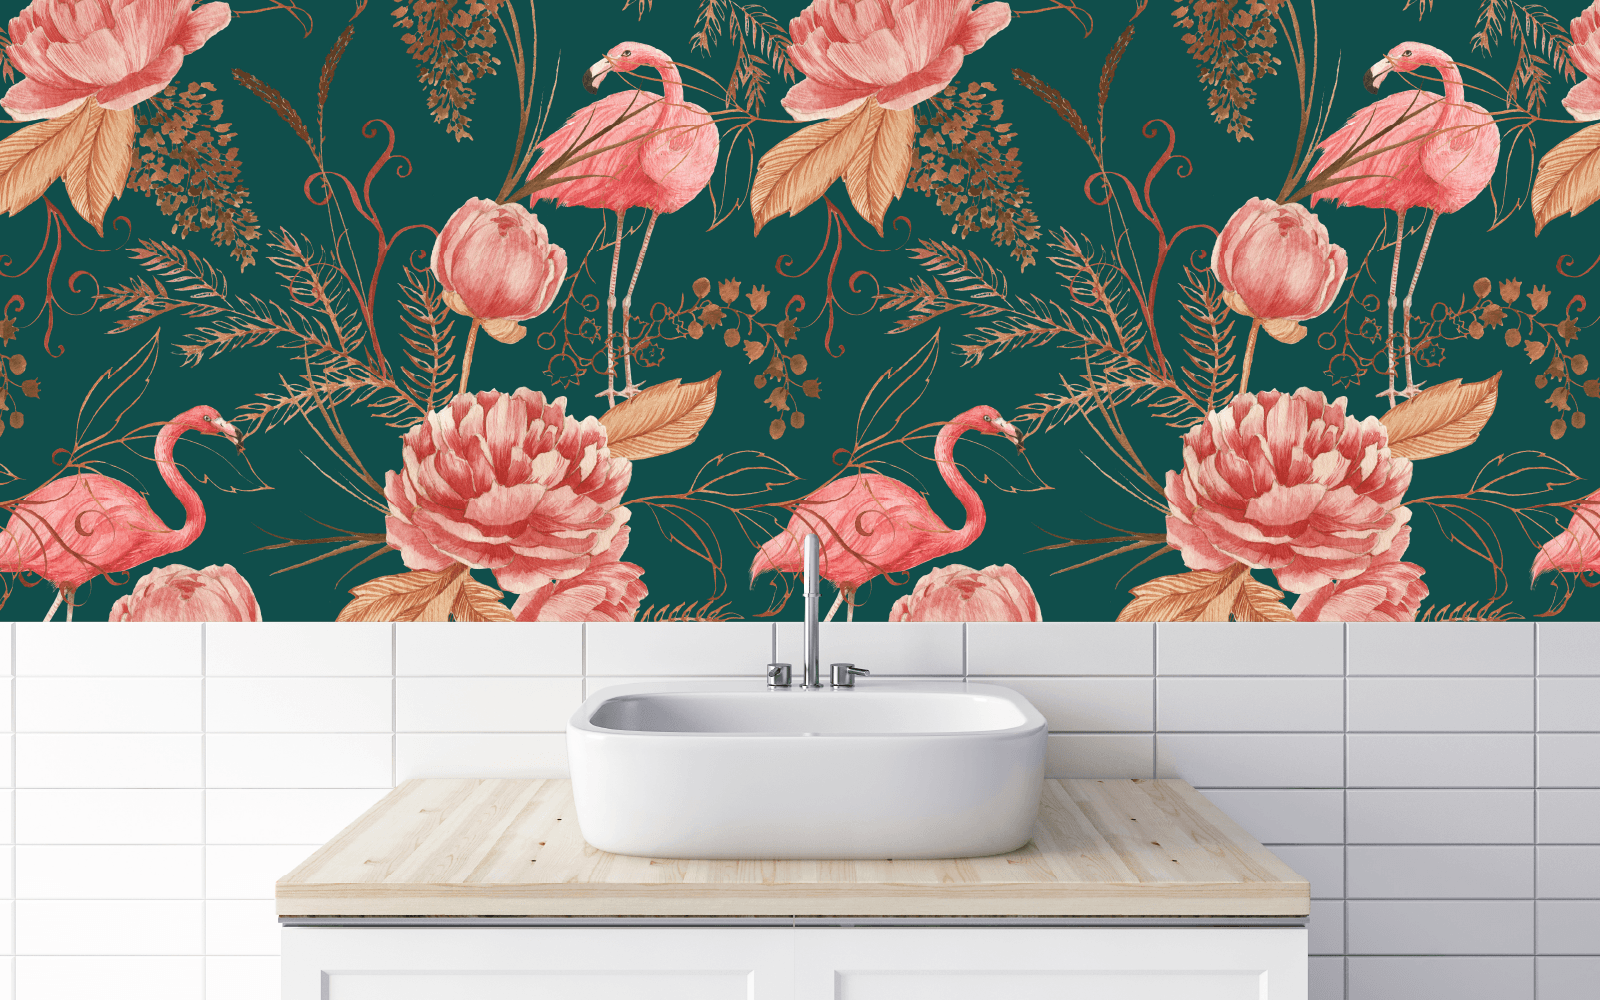 Pink flowers and flamingos grace a green wall above and behind a vessel sink on a vanity in front of a white tile wall.